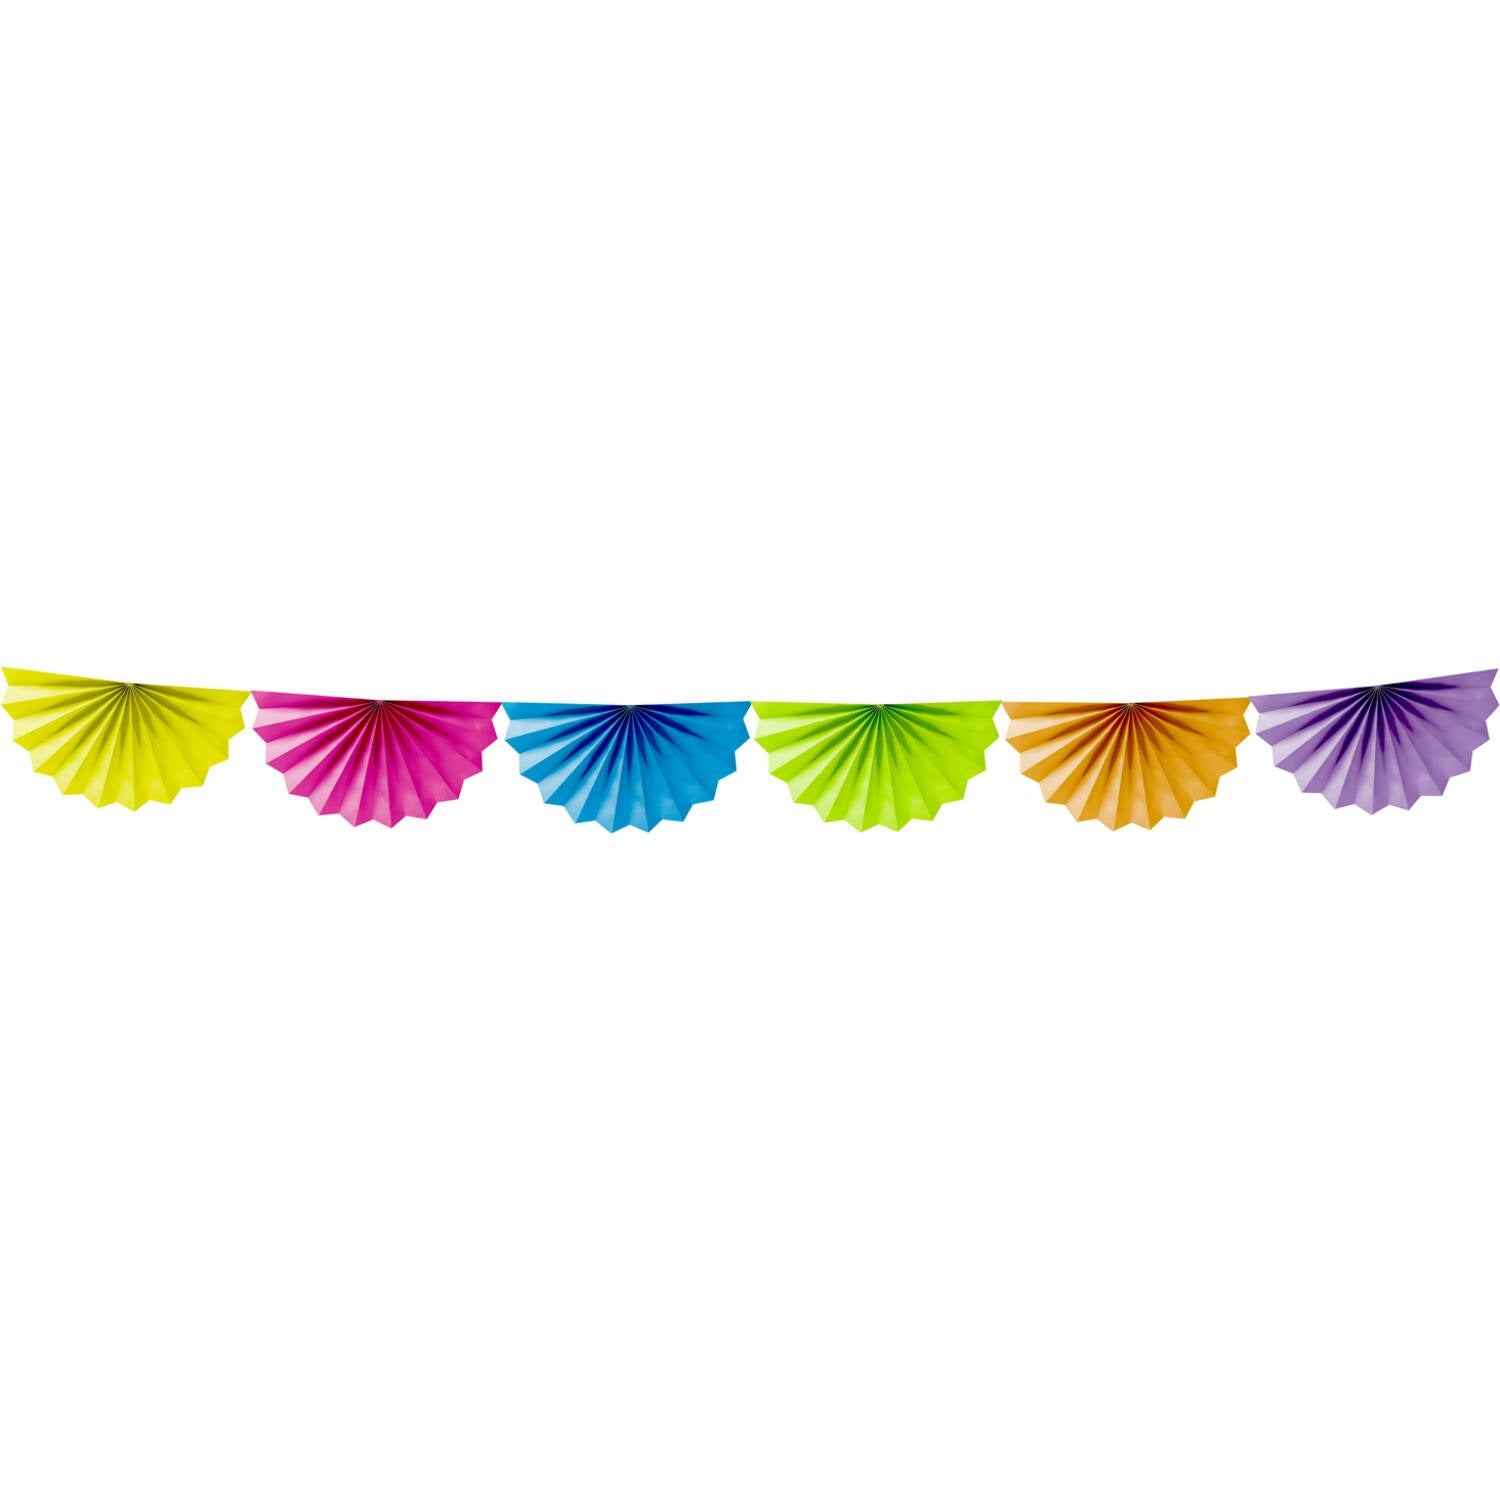 Garland colored paper ribbons 4m